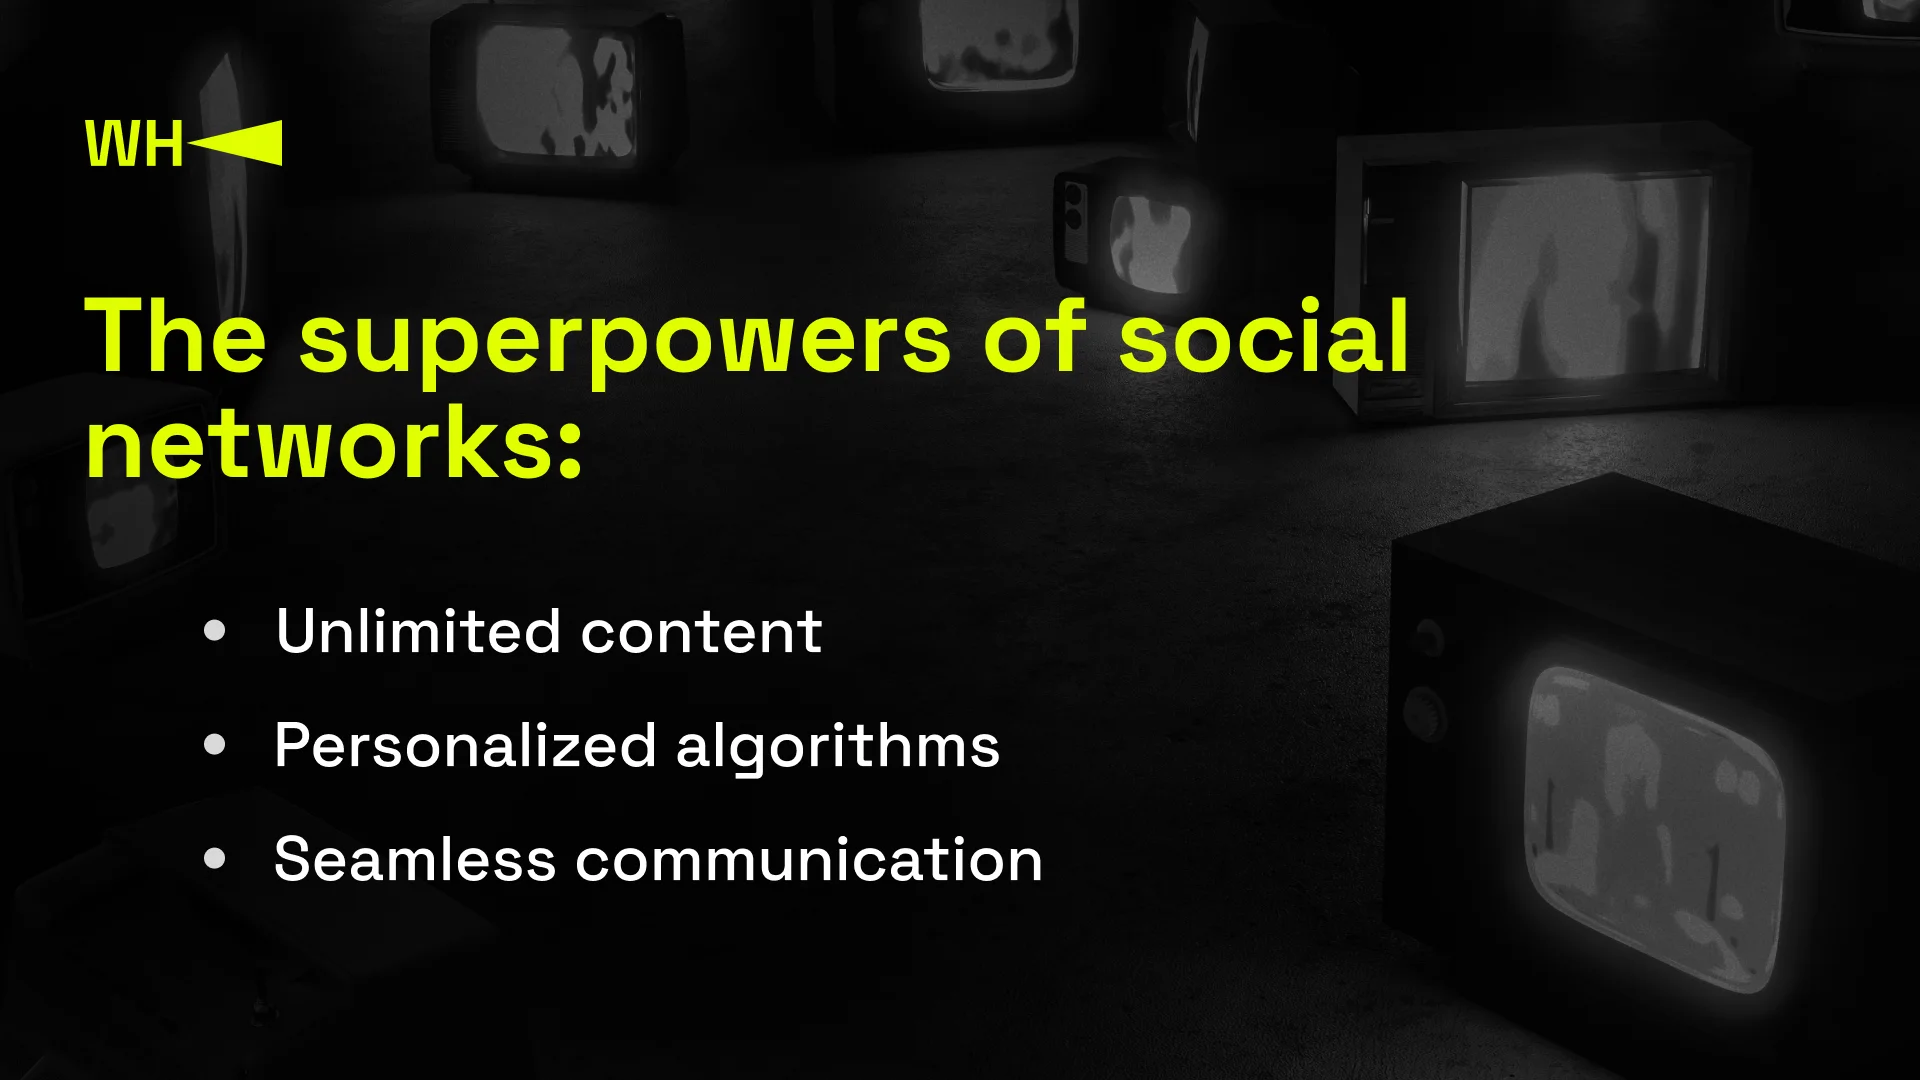 The superpowers of social networks. Credits: WePlay Holding